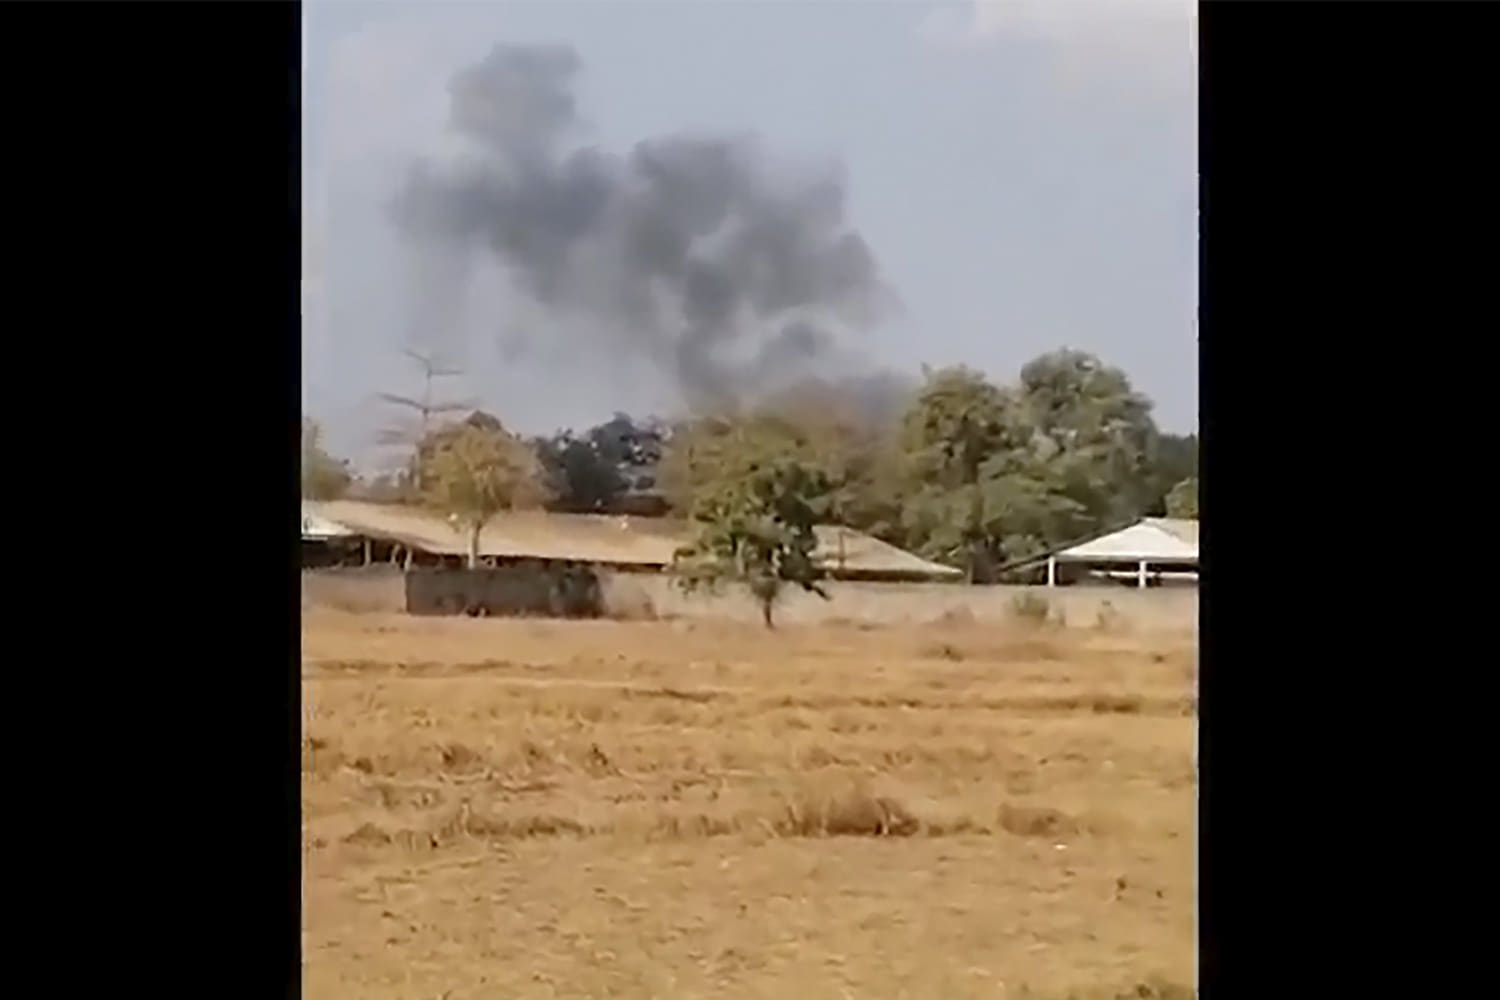 A munitions explosion at a Cambodian army base kills 20 soldiers, cause is unclear